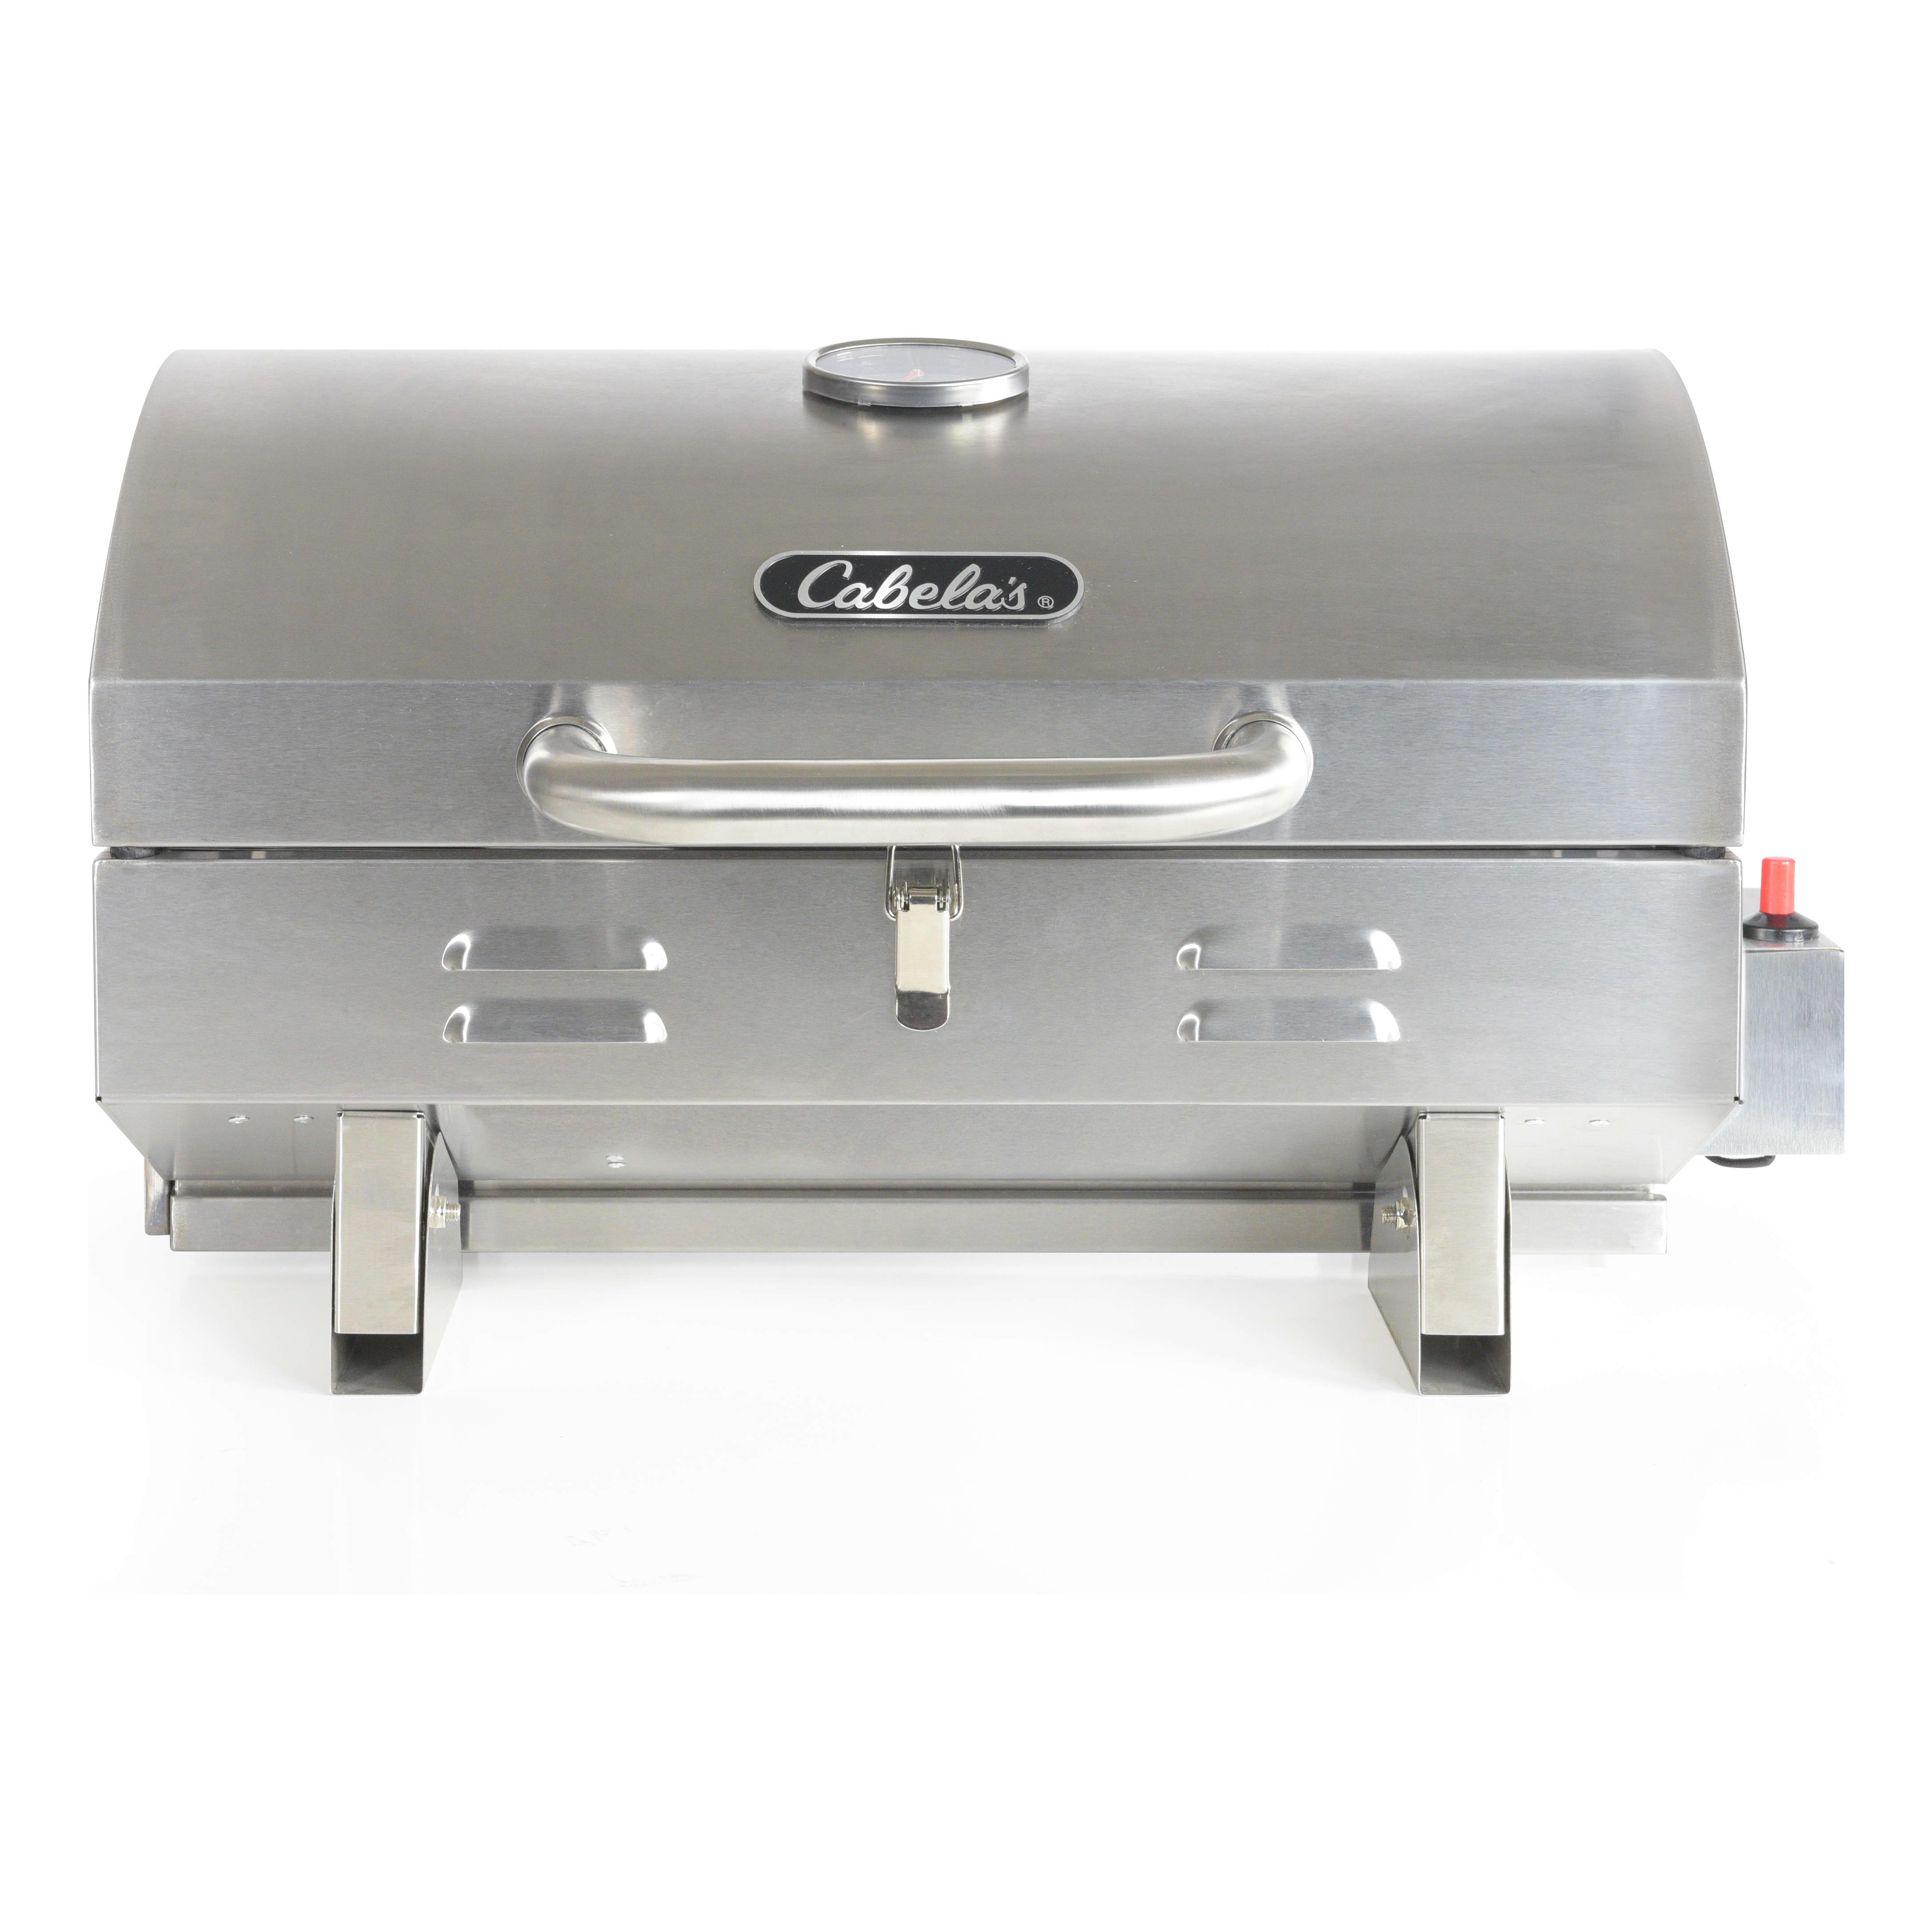 Cabela’s Stainless Steel Tabletop Grill - Cabelas - CABELA'S - Grills